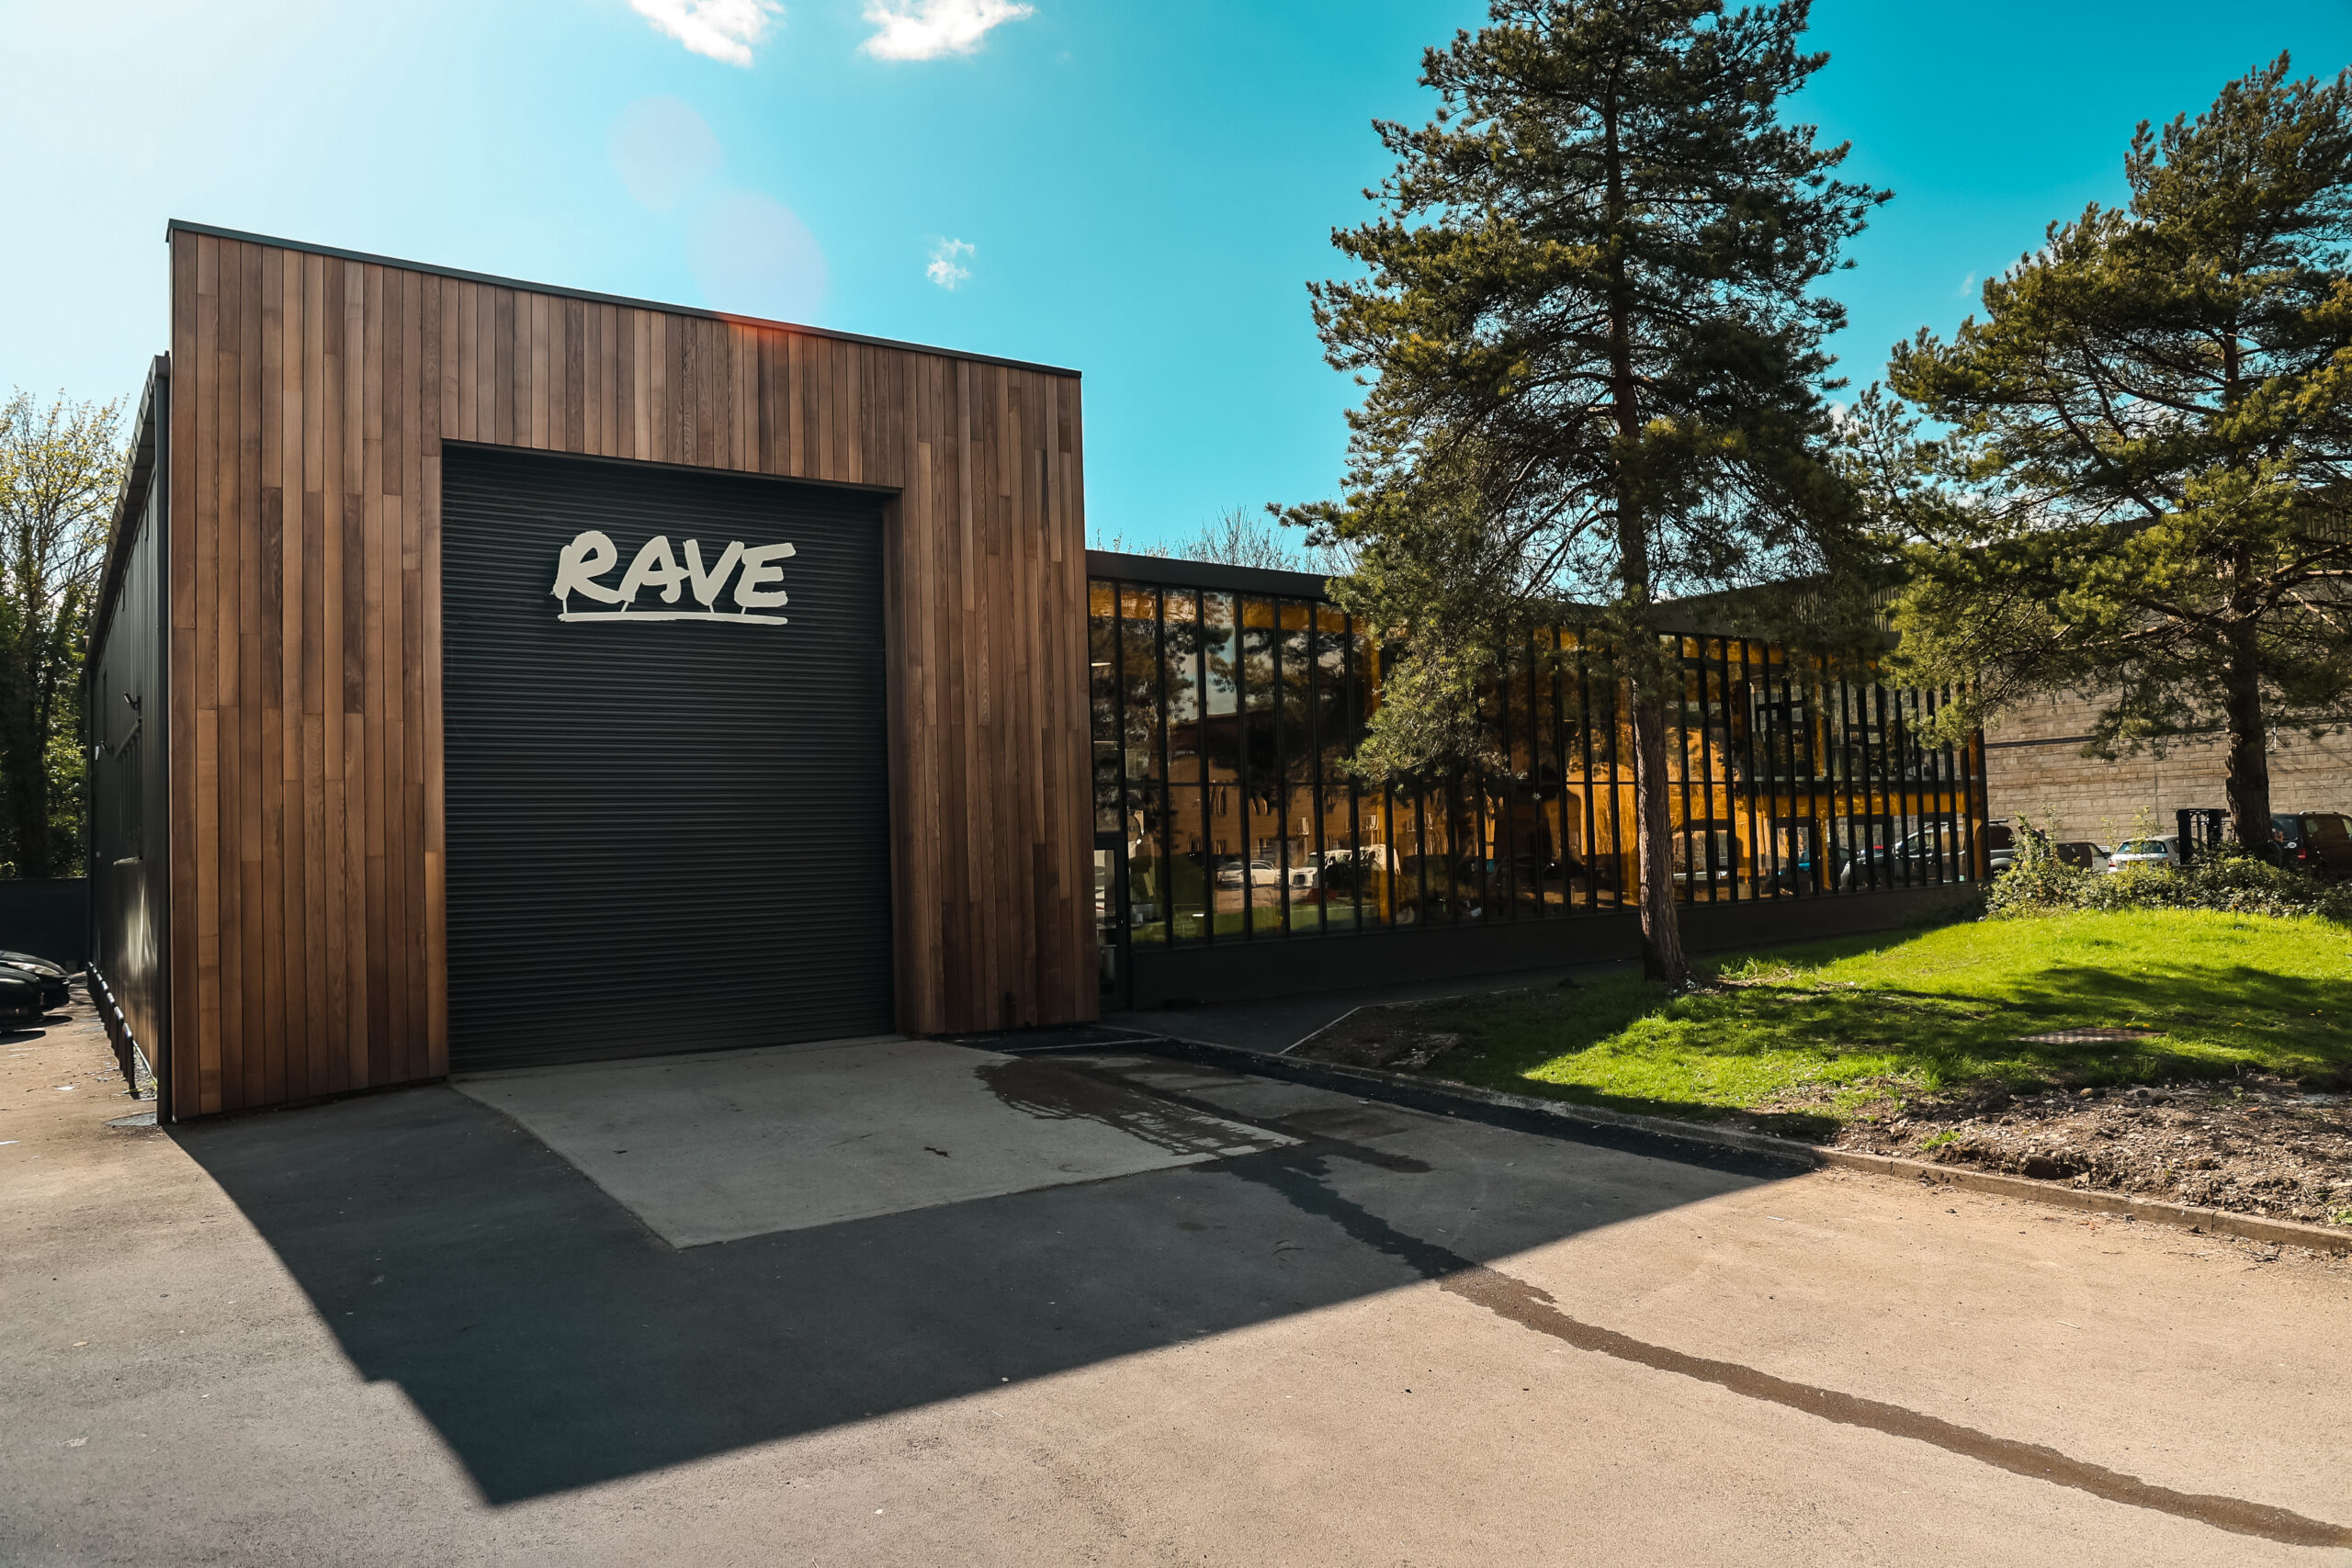 Rave Coffee inviting coffee lovers to its new headquarters in